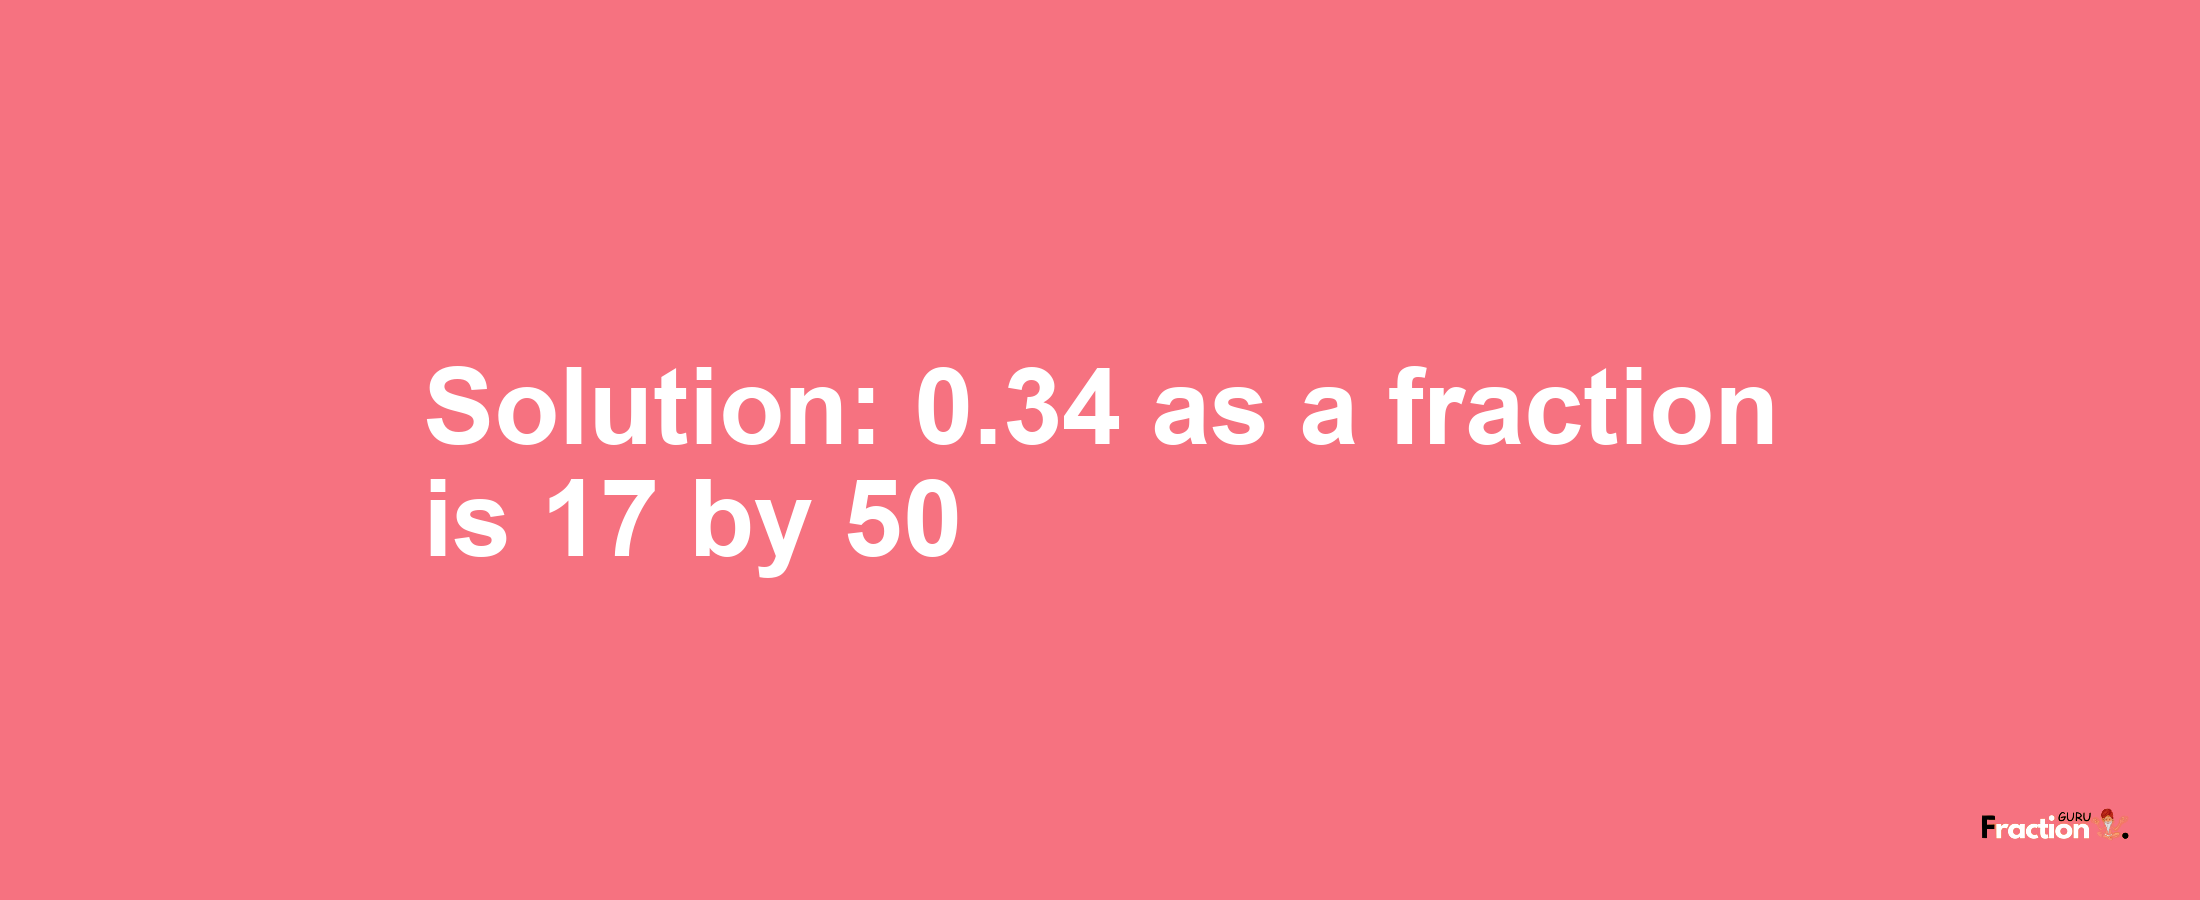 Solution:0.34 as a fraction is 17/50